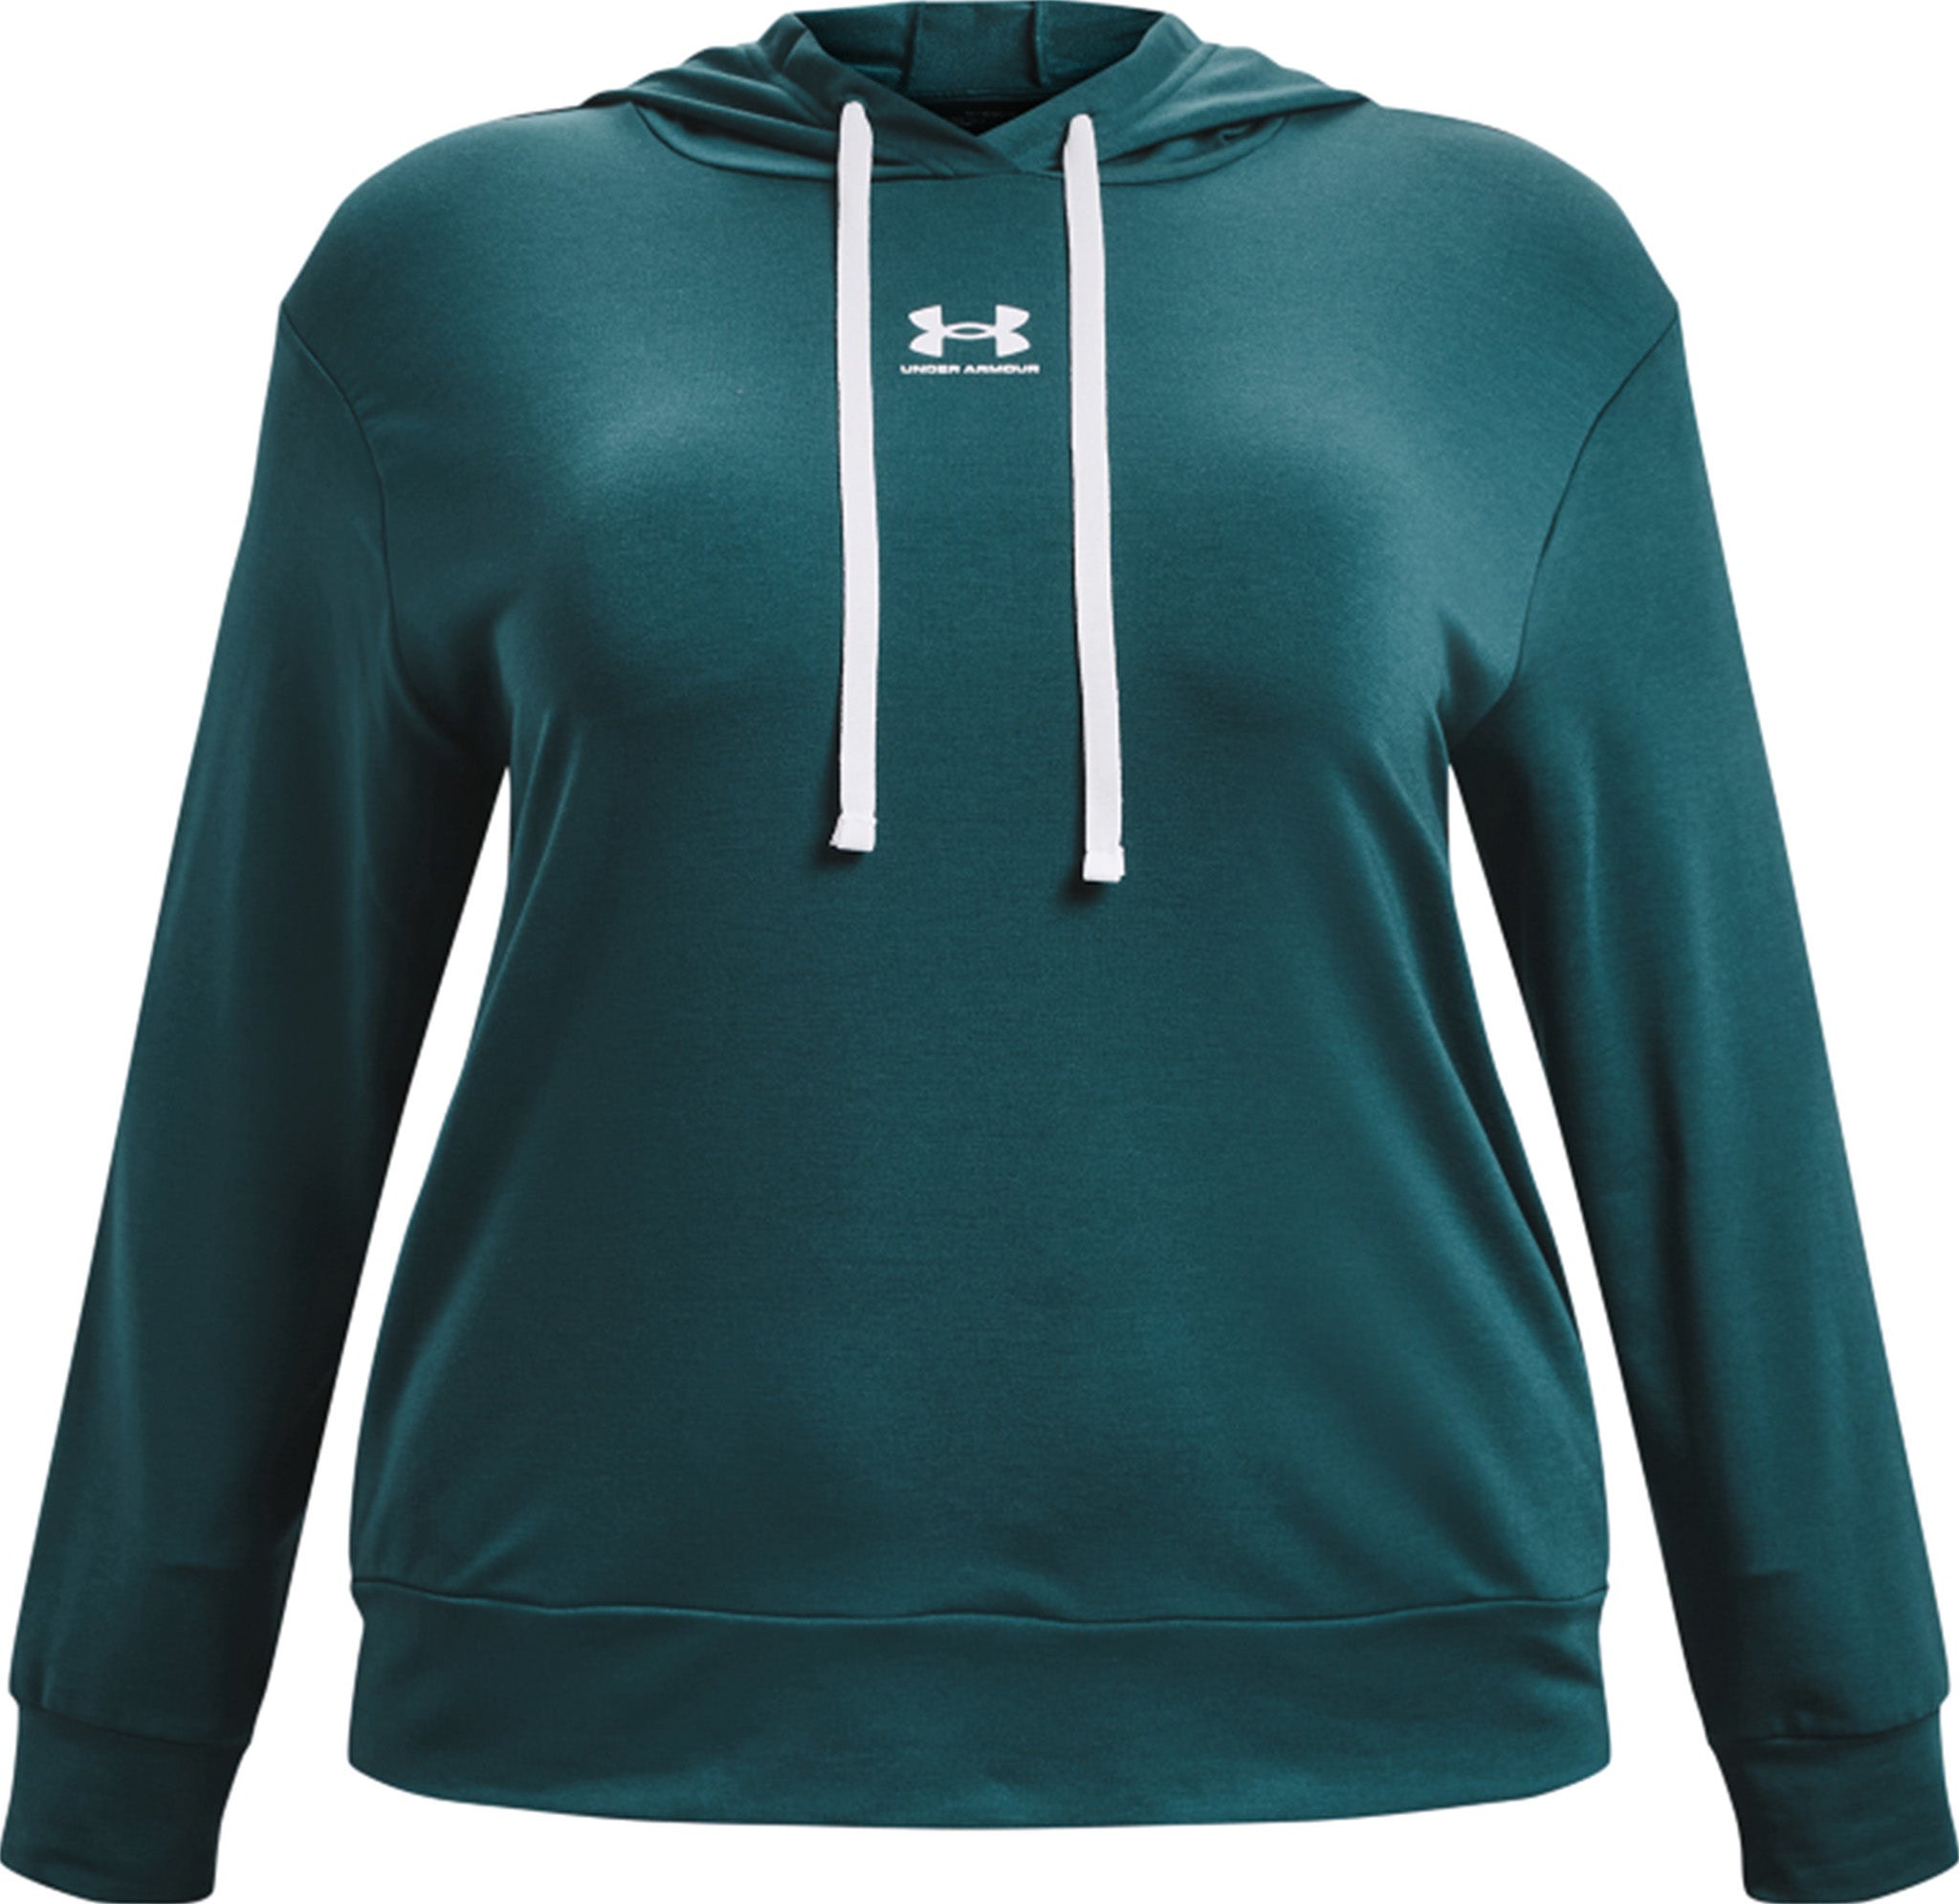 Under Armour Rival Terry Hoodie - Women's